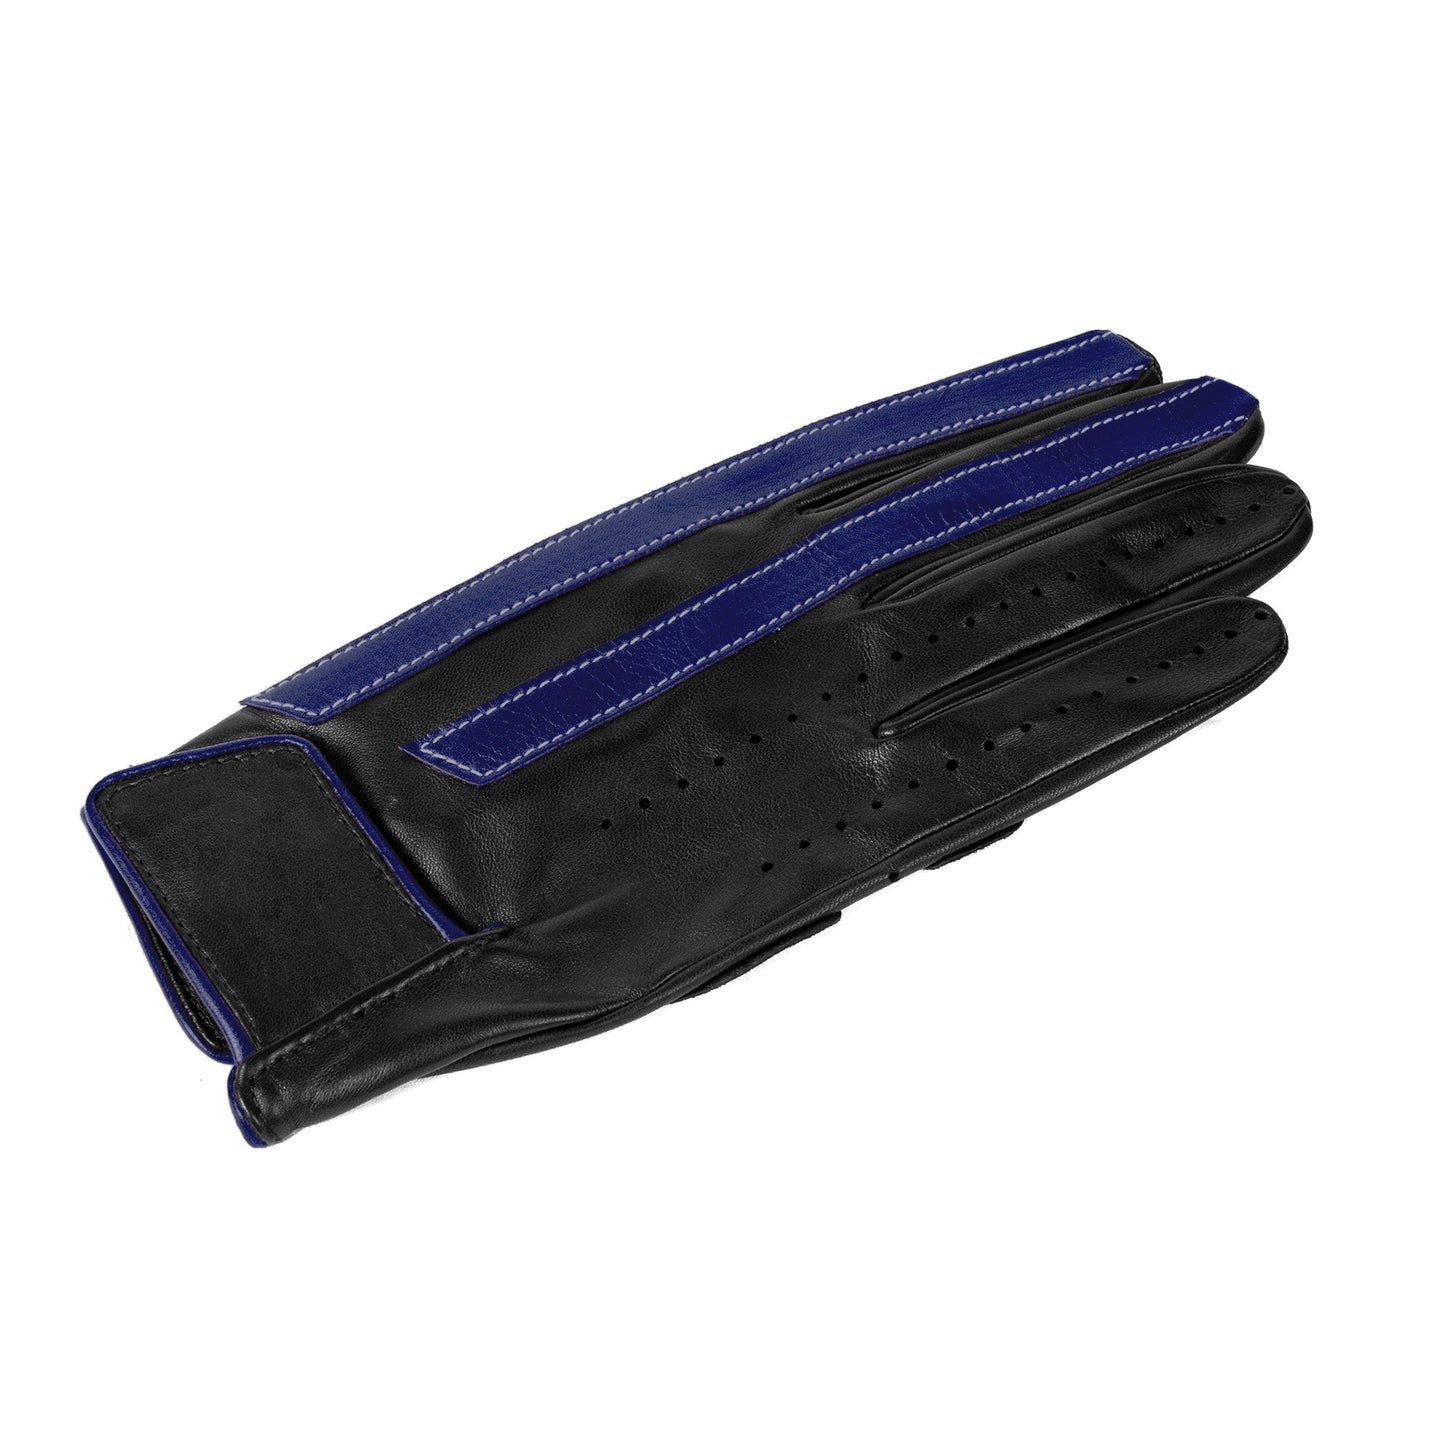 Men's unlined driving gloves in black nappa leather with blue leather strips